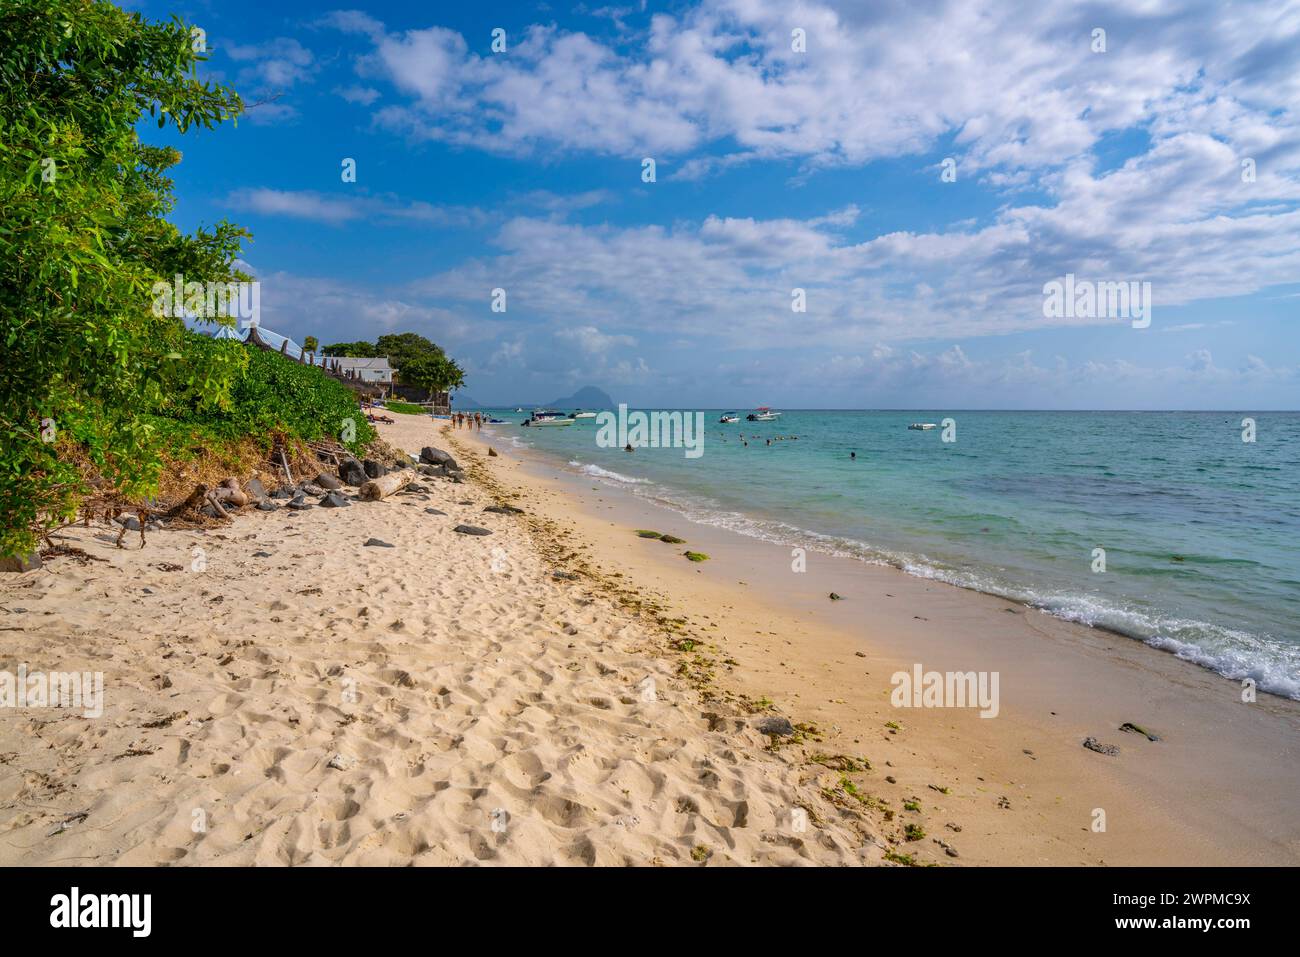 View of beach in Flic en Flac, Mauritius, Indian Ocean, Africa Copyright: FrankxFell 844-32167 Stock Photo